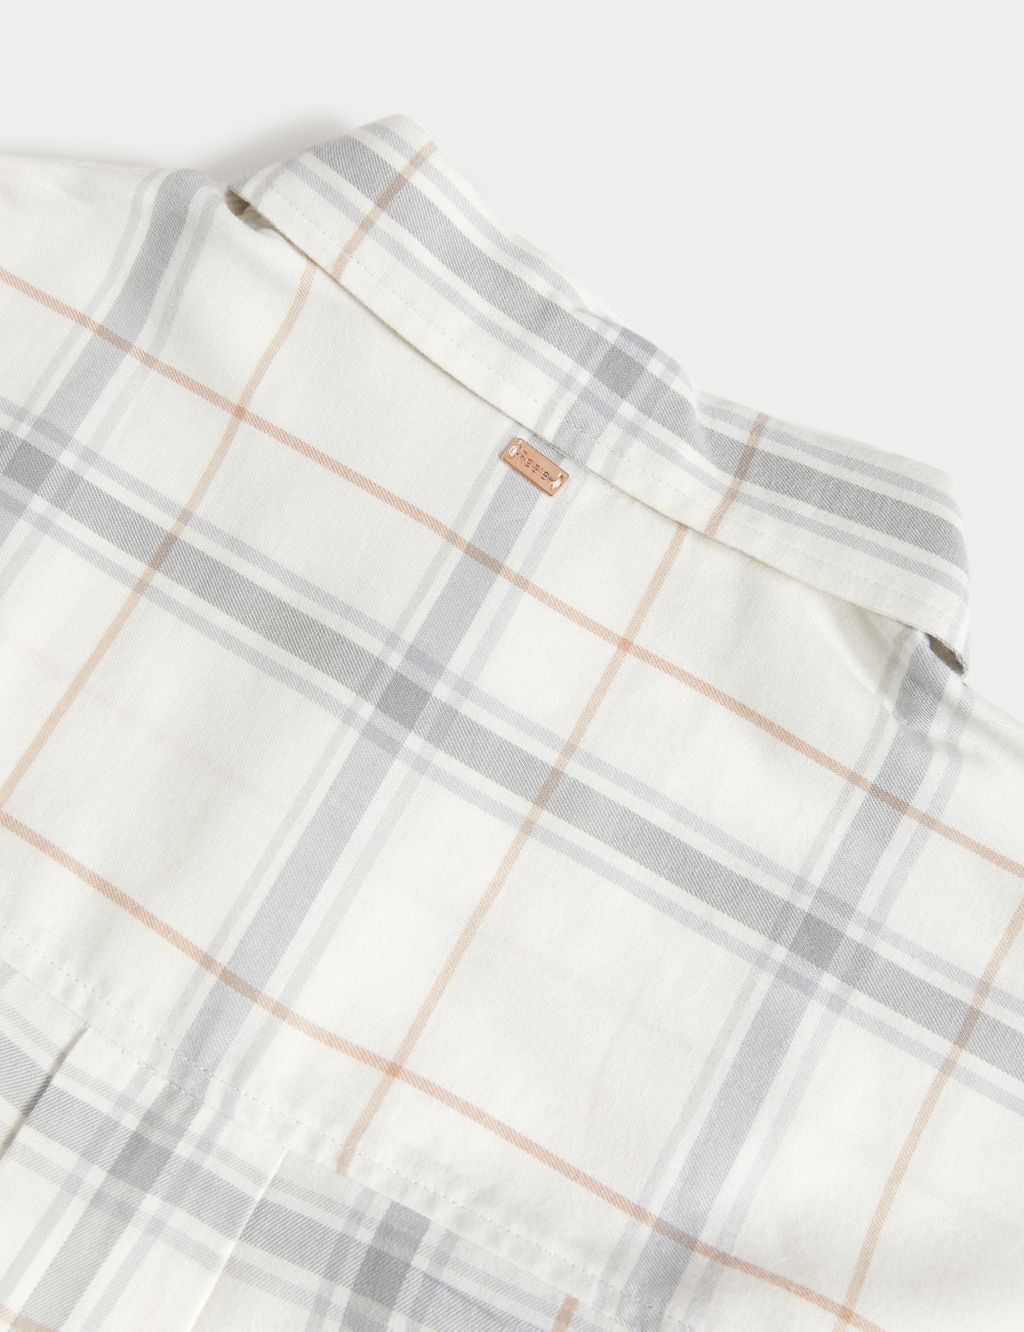 Cotton Rich Woven Checked Lounge Shirt image 6